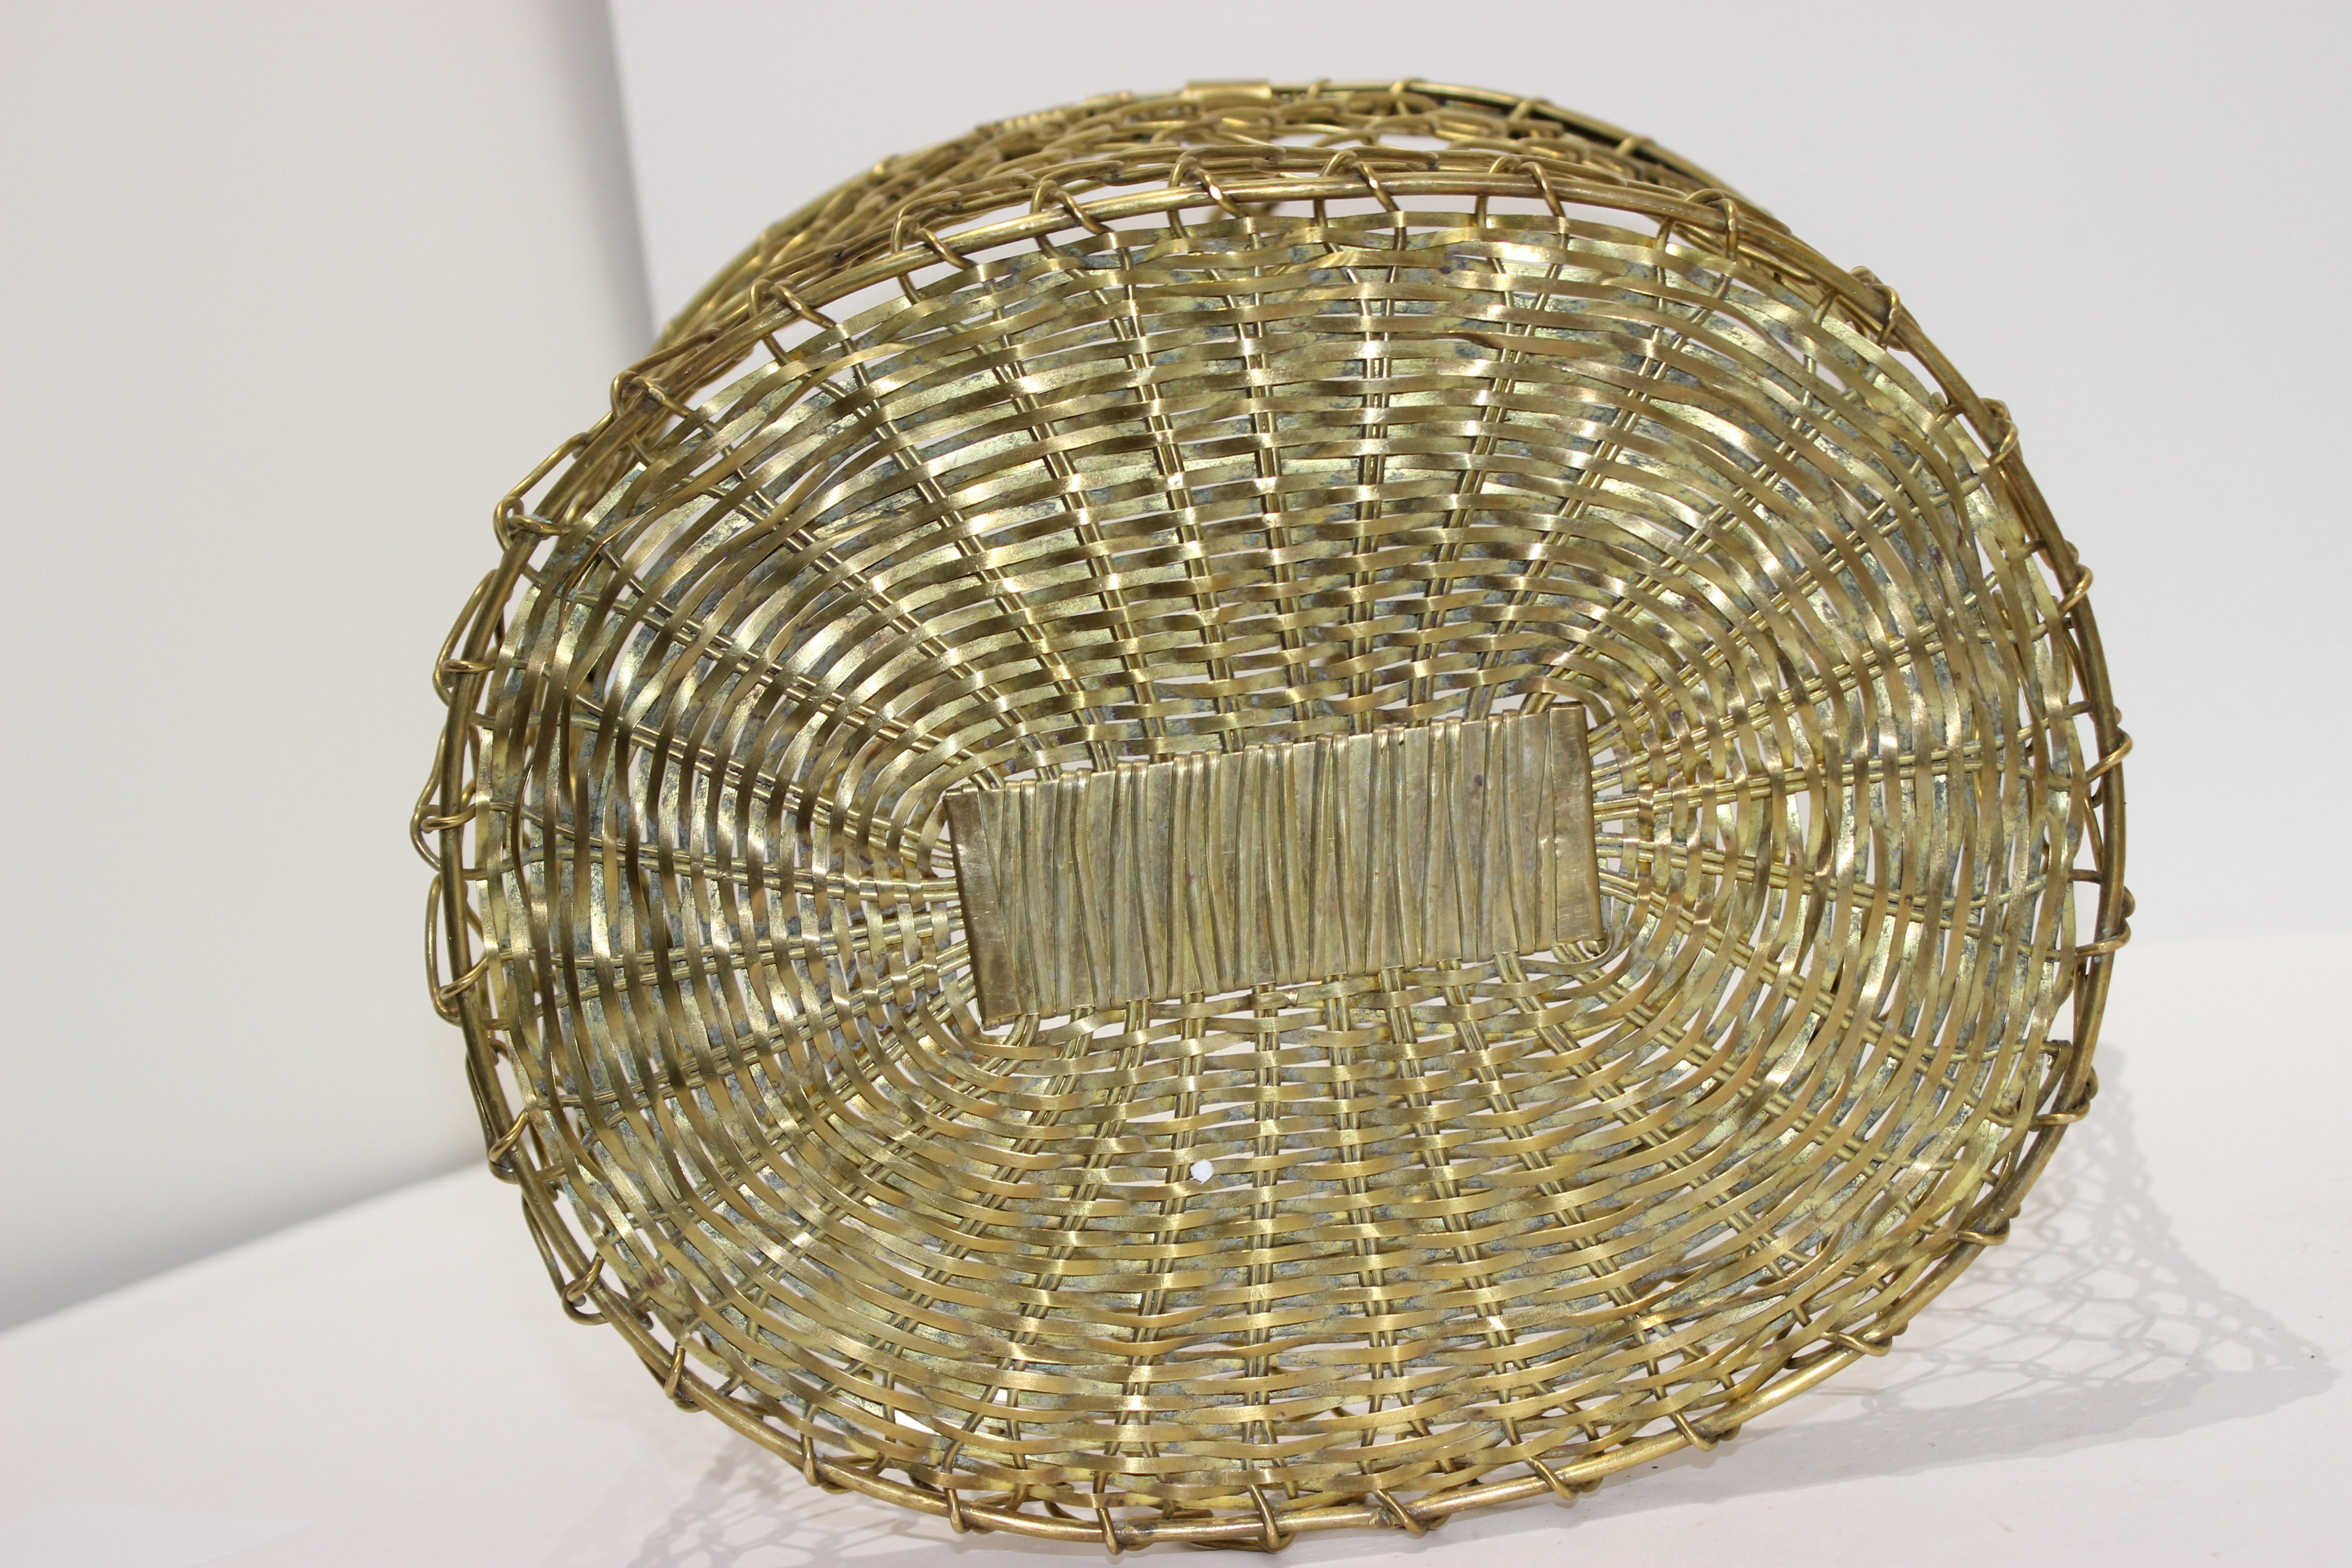 French Country Woven Brass Basket, Mid-20th Century For Sale 2